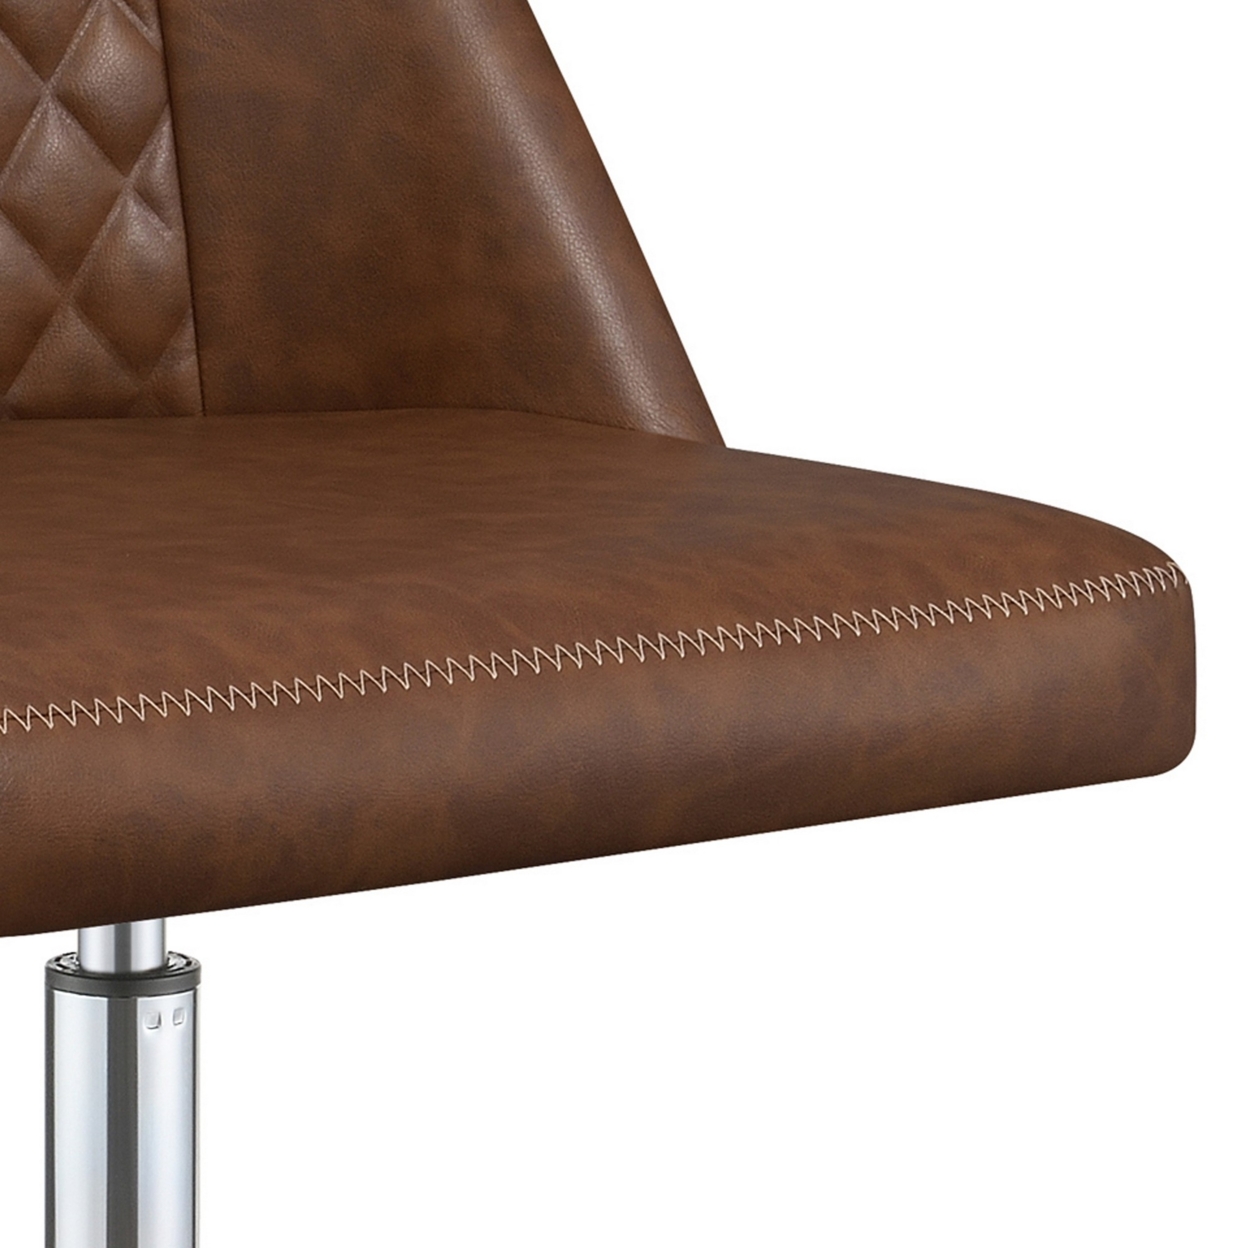 Leatherette Office Chair With Sloped Back And Diamond Stitching, Brown- Saltoro Sherpi